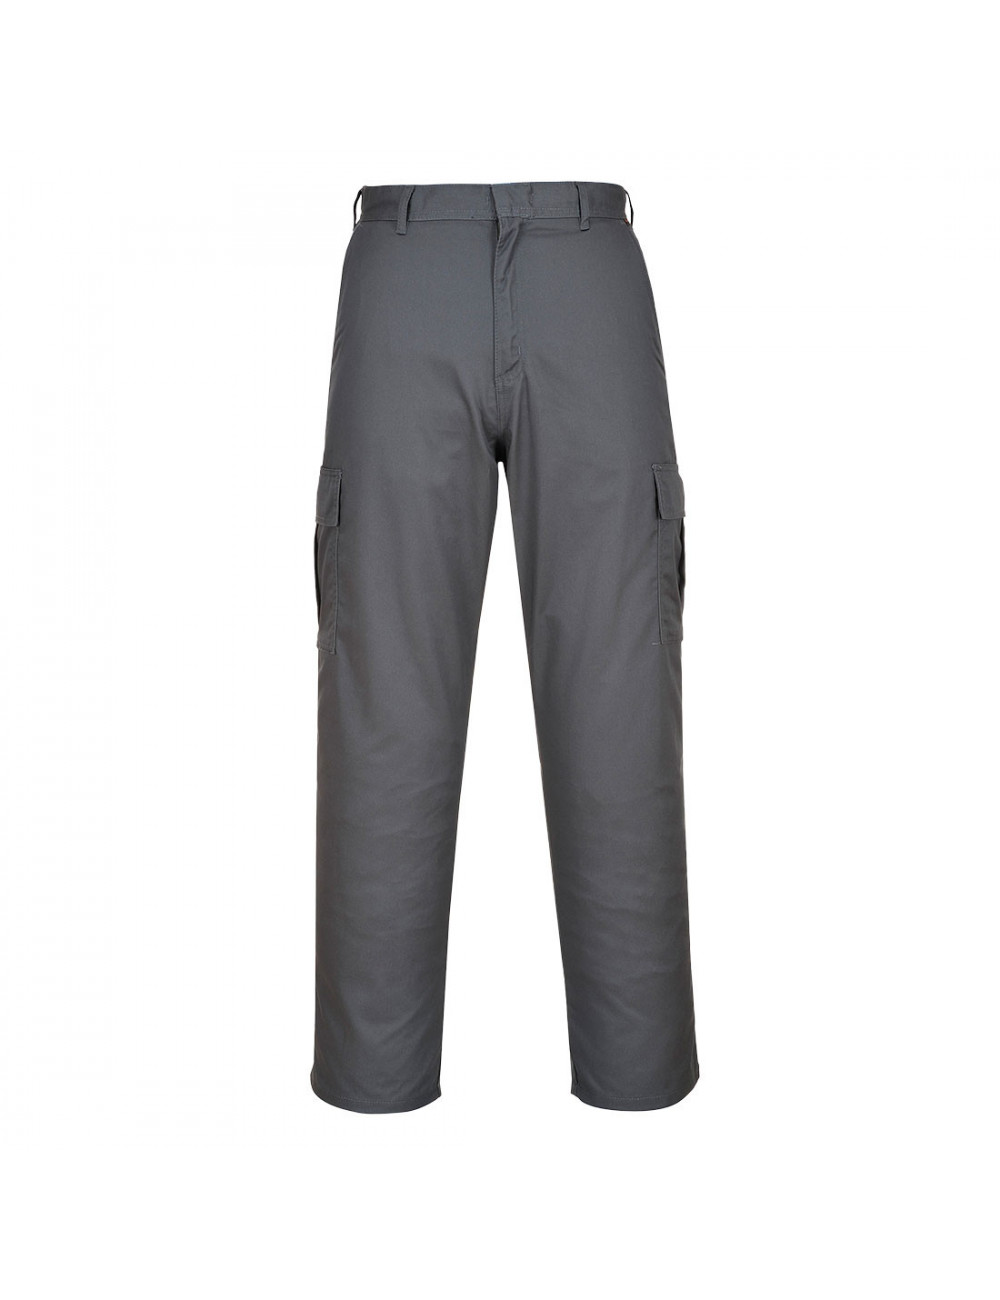 Cargo trousers grey Portwest